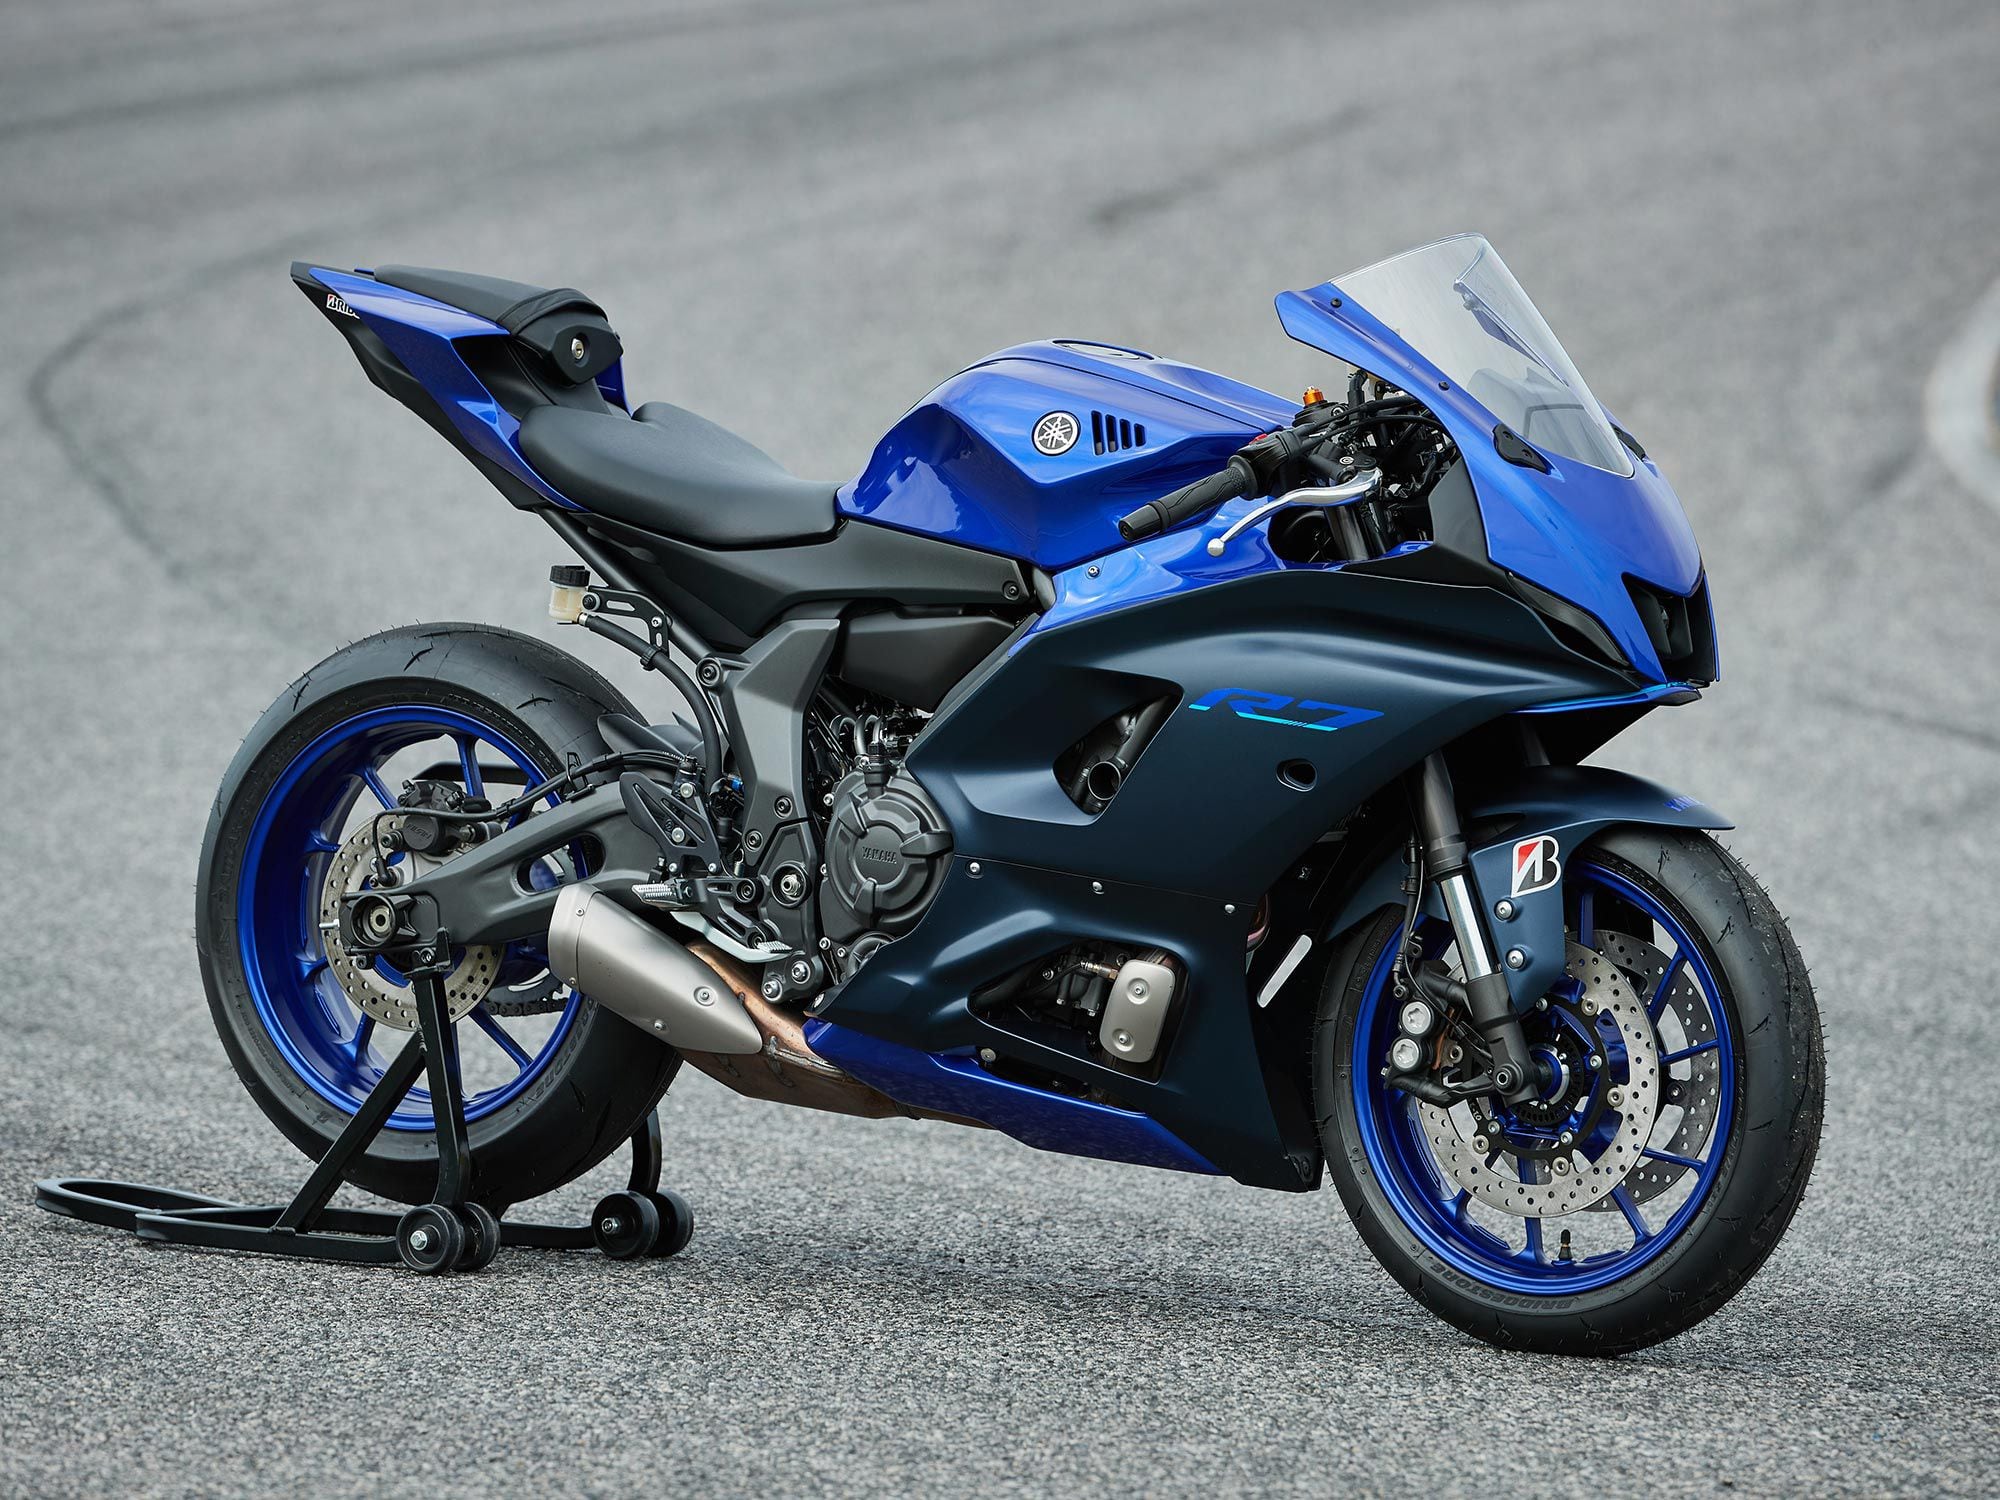 It’s very likely that the new YZF-R9 will follow in the footsteps of its little brother YZF-R7.